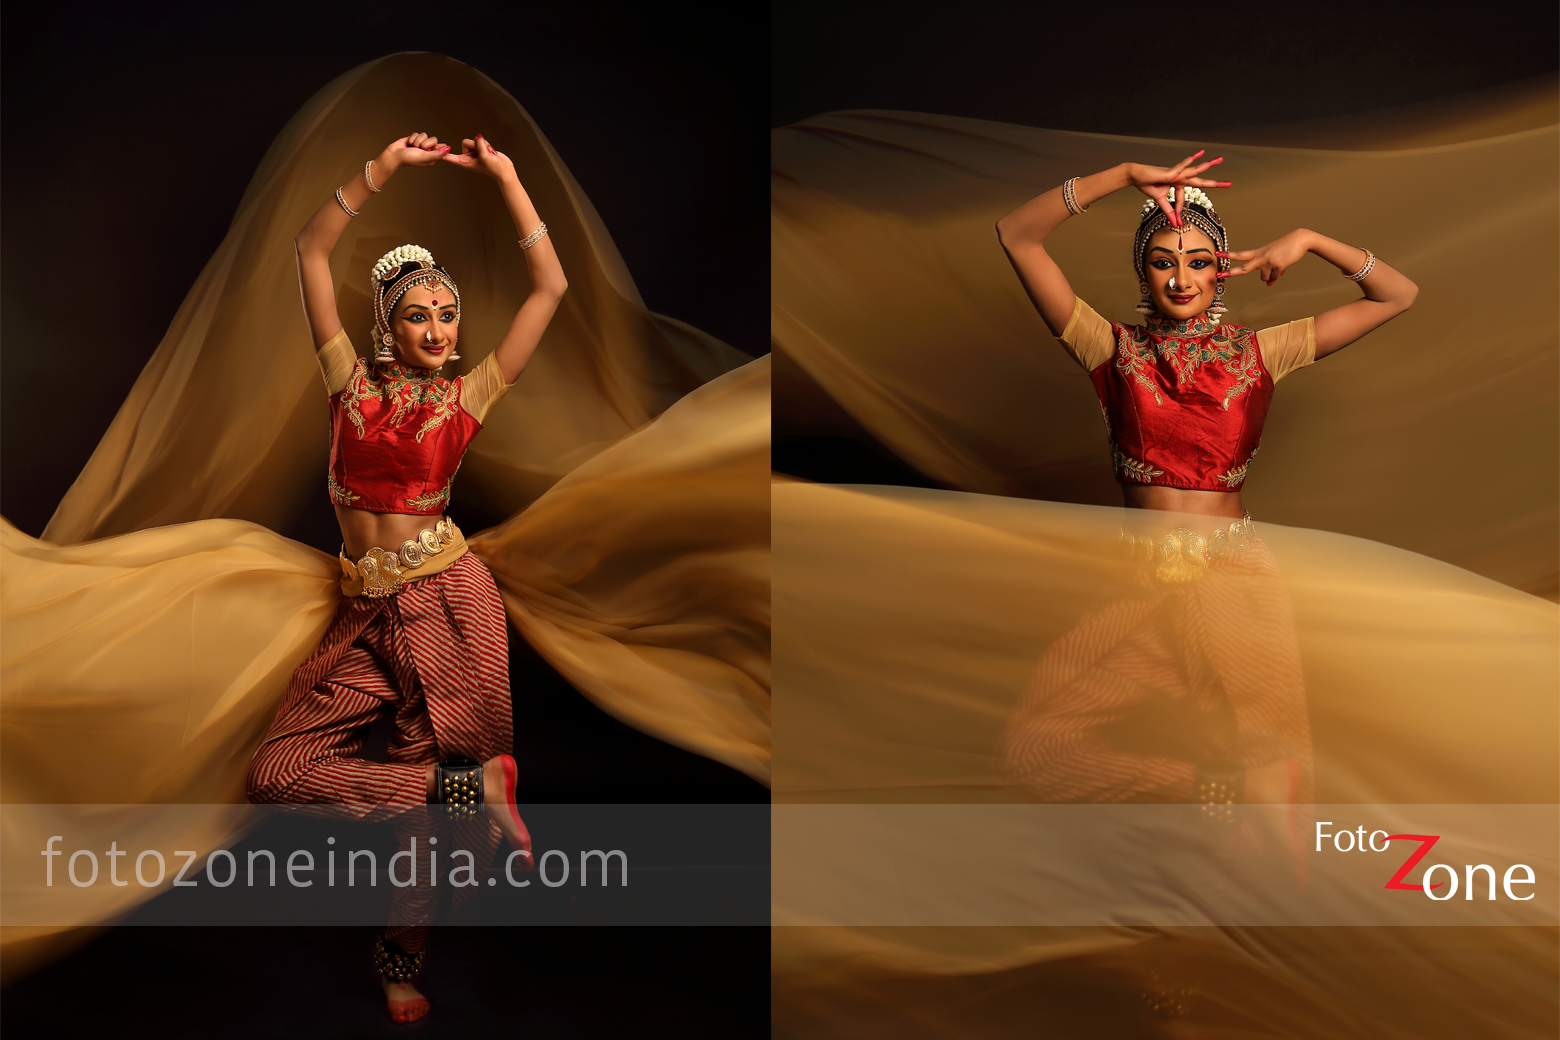 Rajeswari - Chennai,Tamil Nadu : I am a Bharatanatyam dancer with over 12  years of training. I have been teaching Bharatanatyam to students online  for three years. I see students as individuals